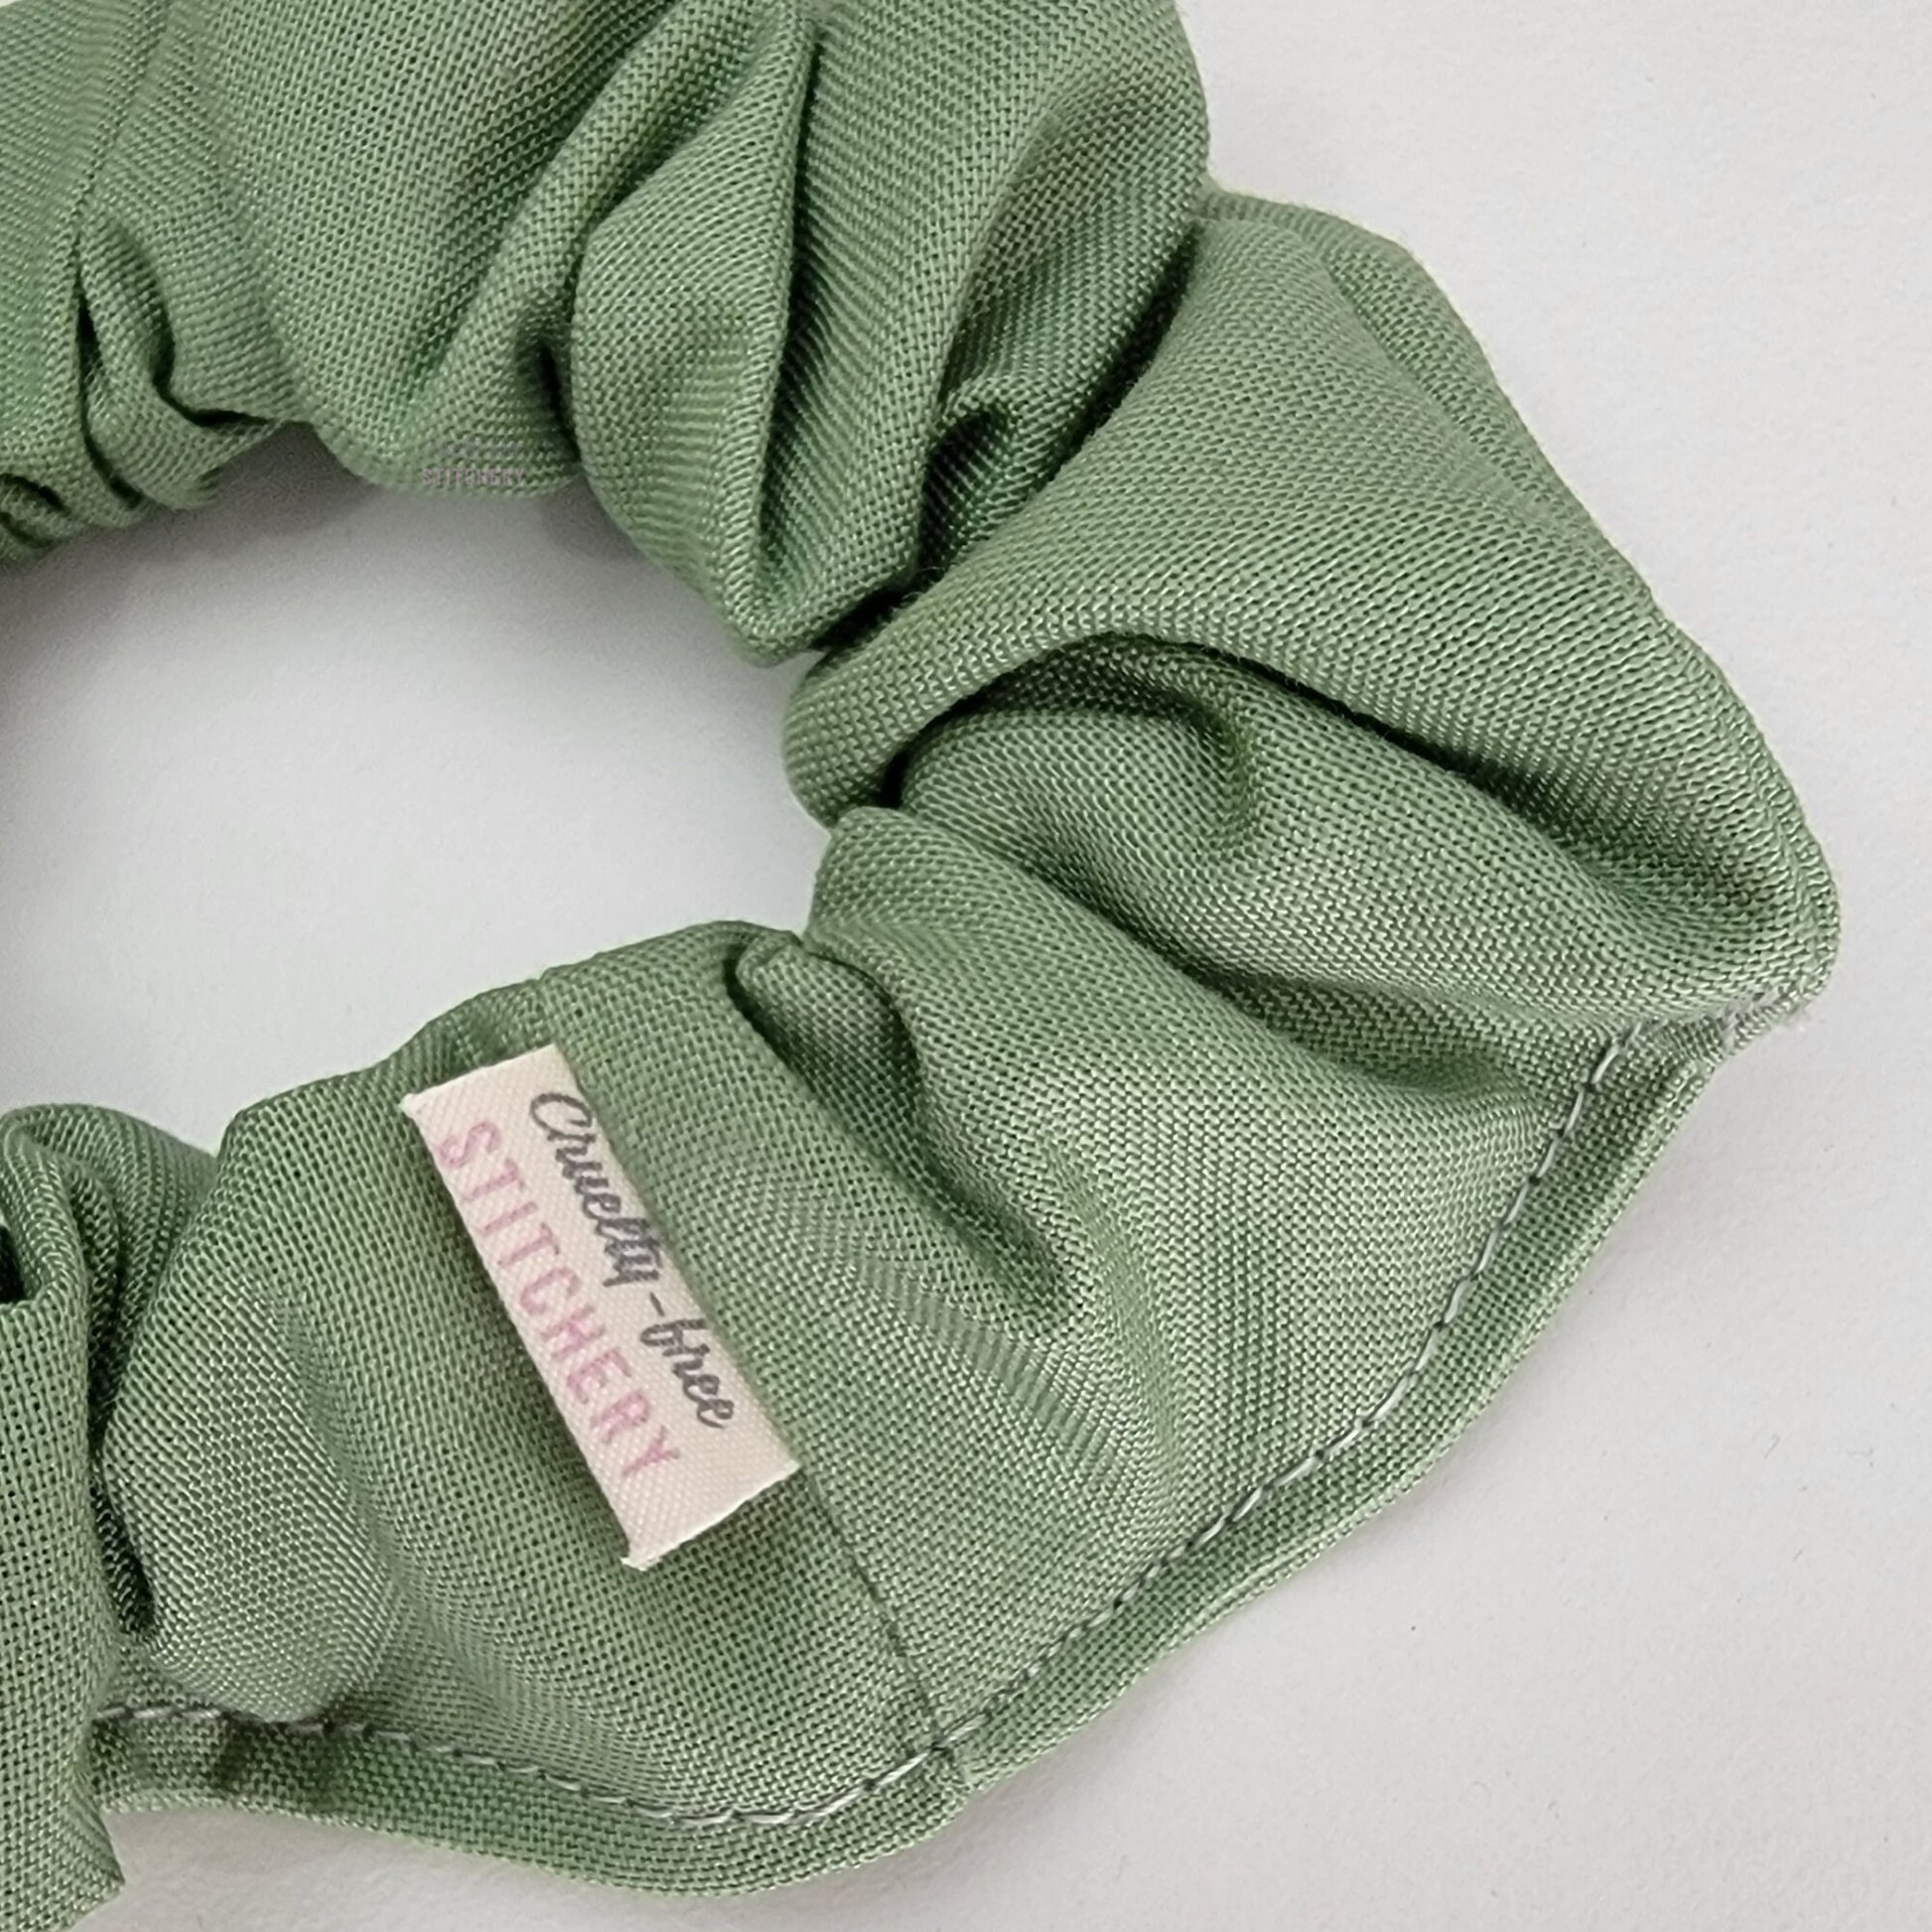 Close-up of the sage green scrunchie with a small white tag with the Cruelty-Free Stitchery logo.